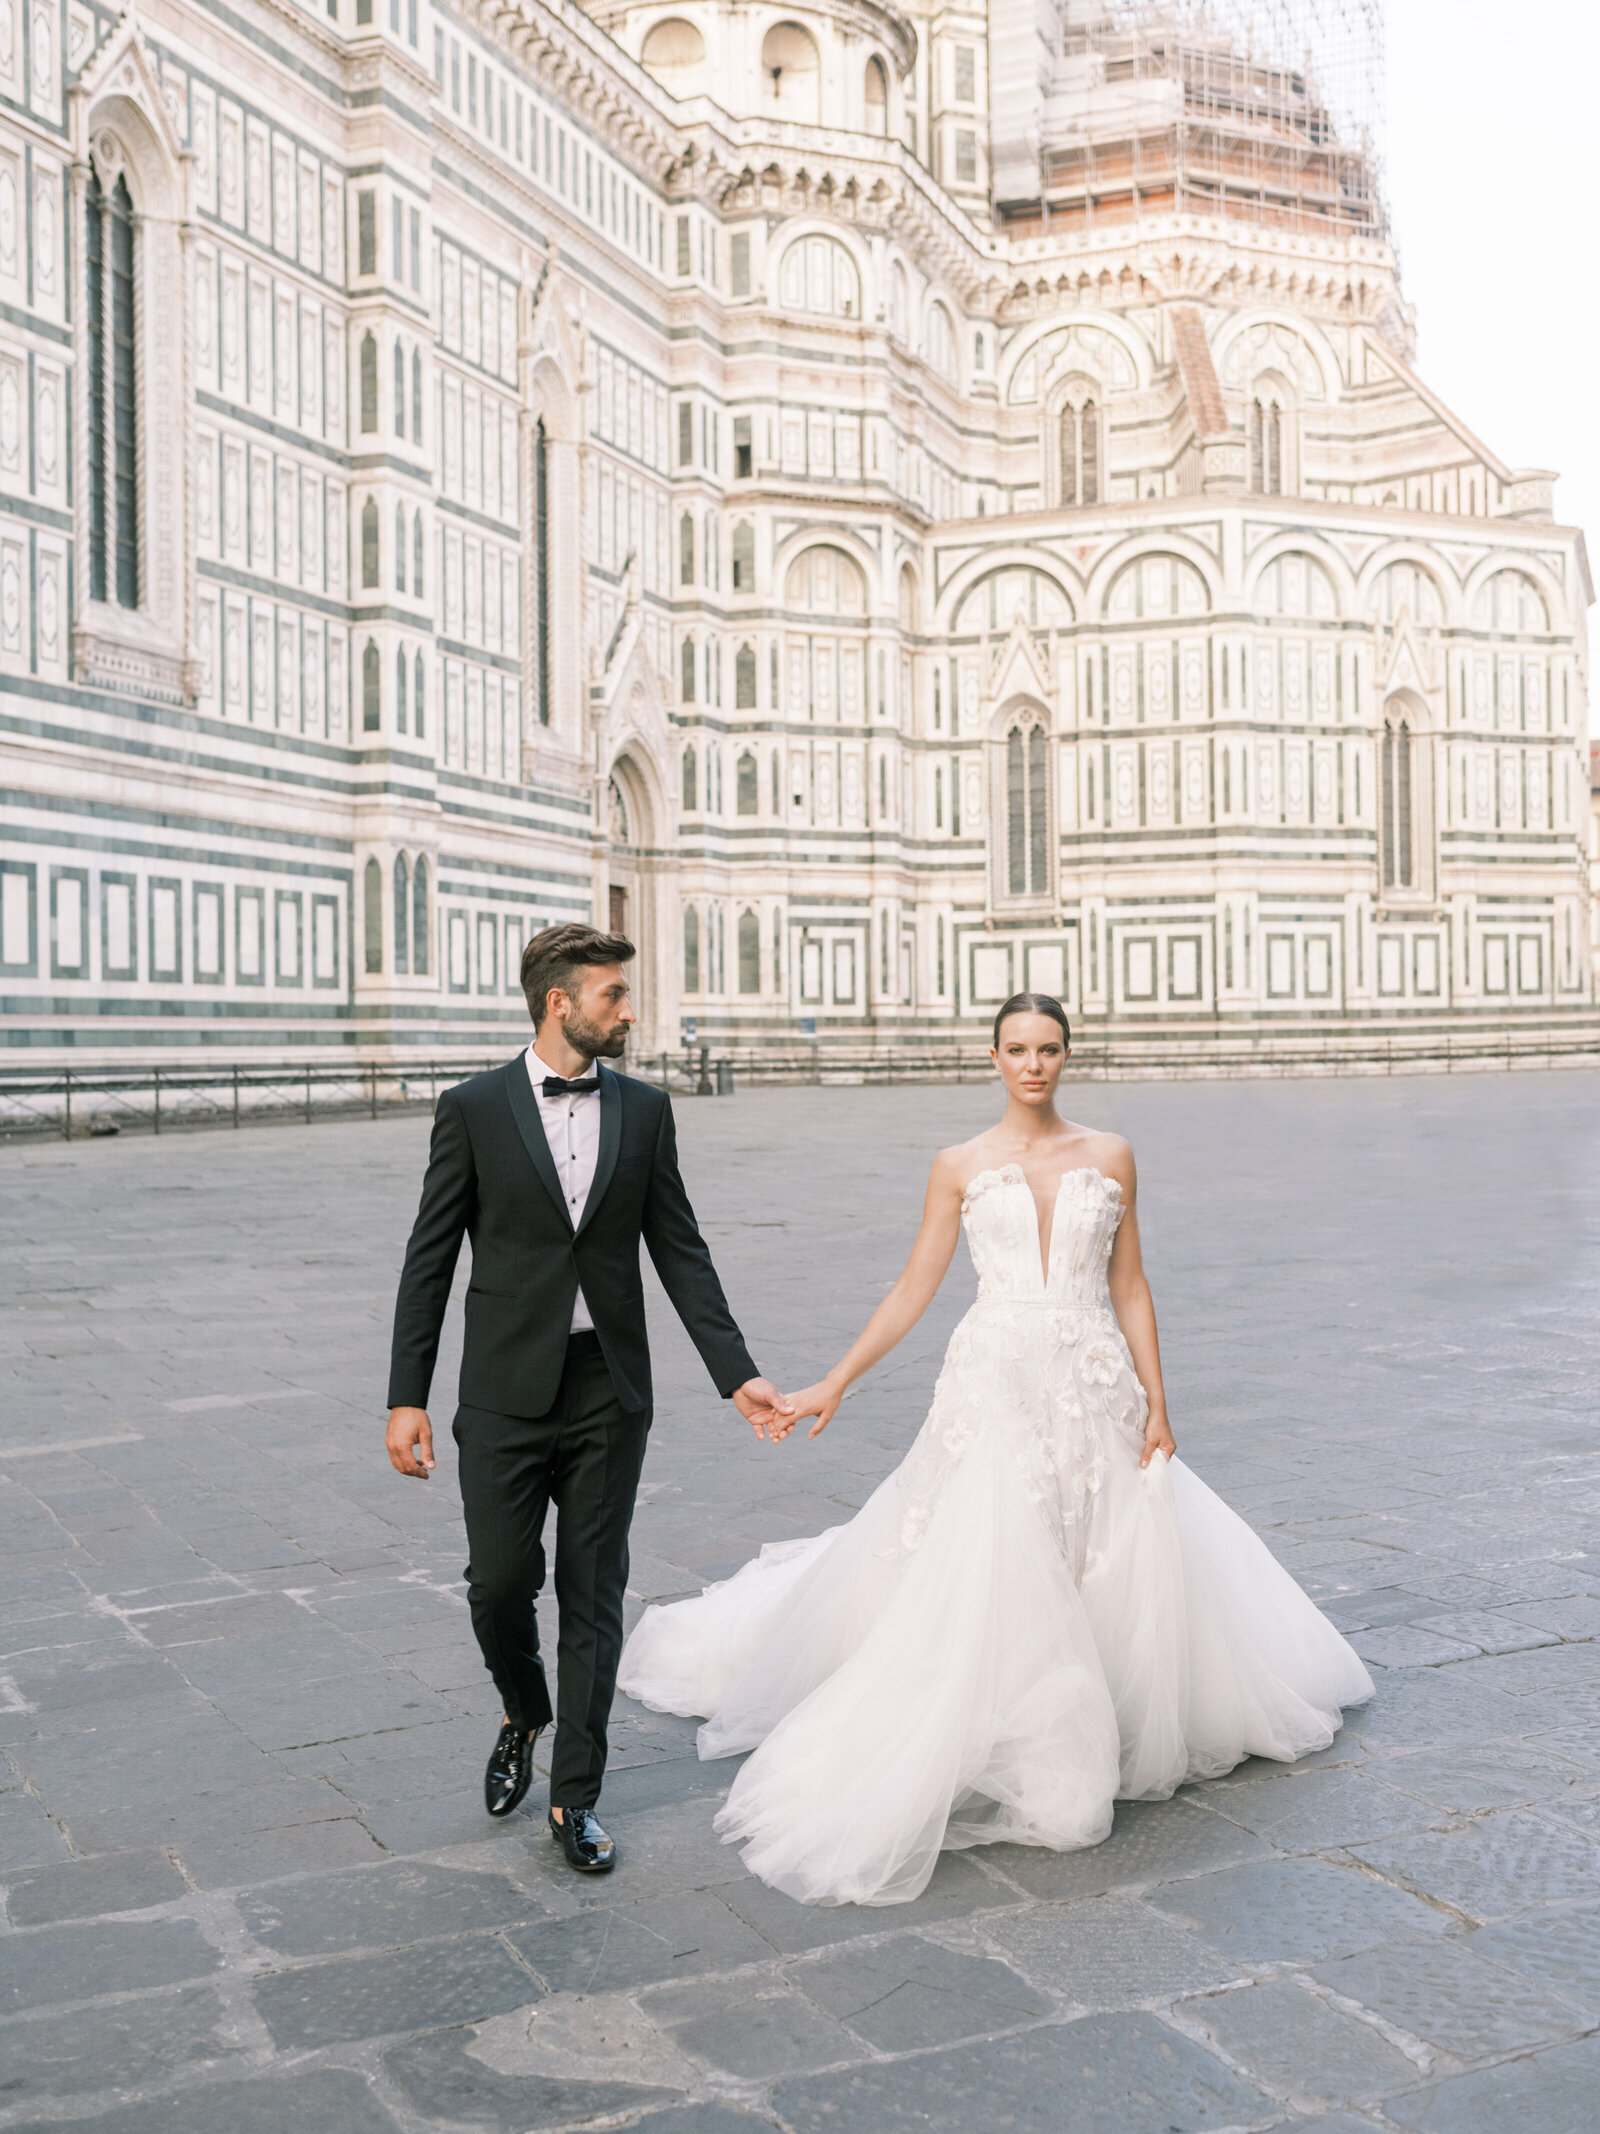 Bride and groom pose in front of Duomo in Florence Italy